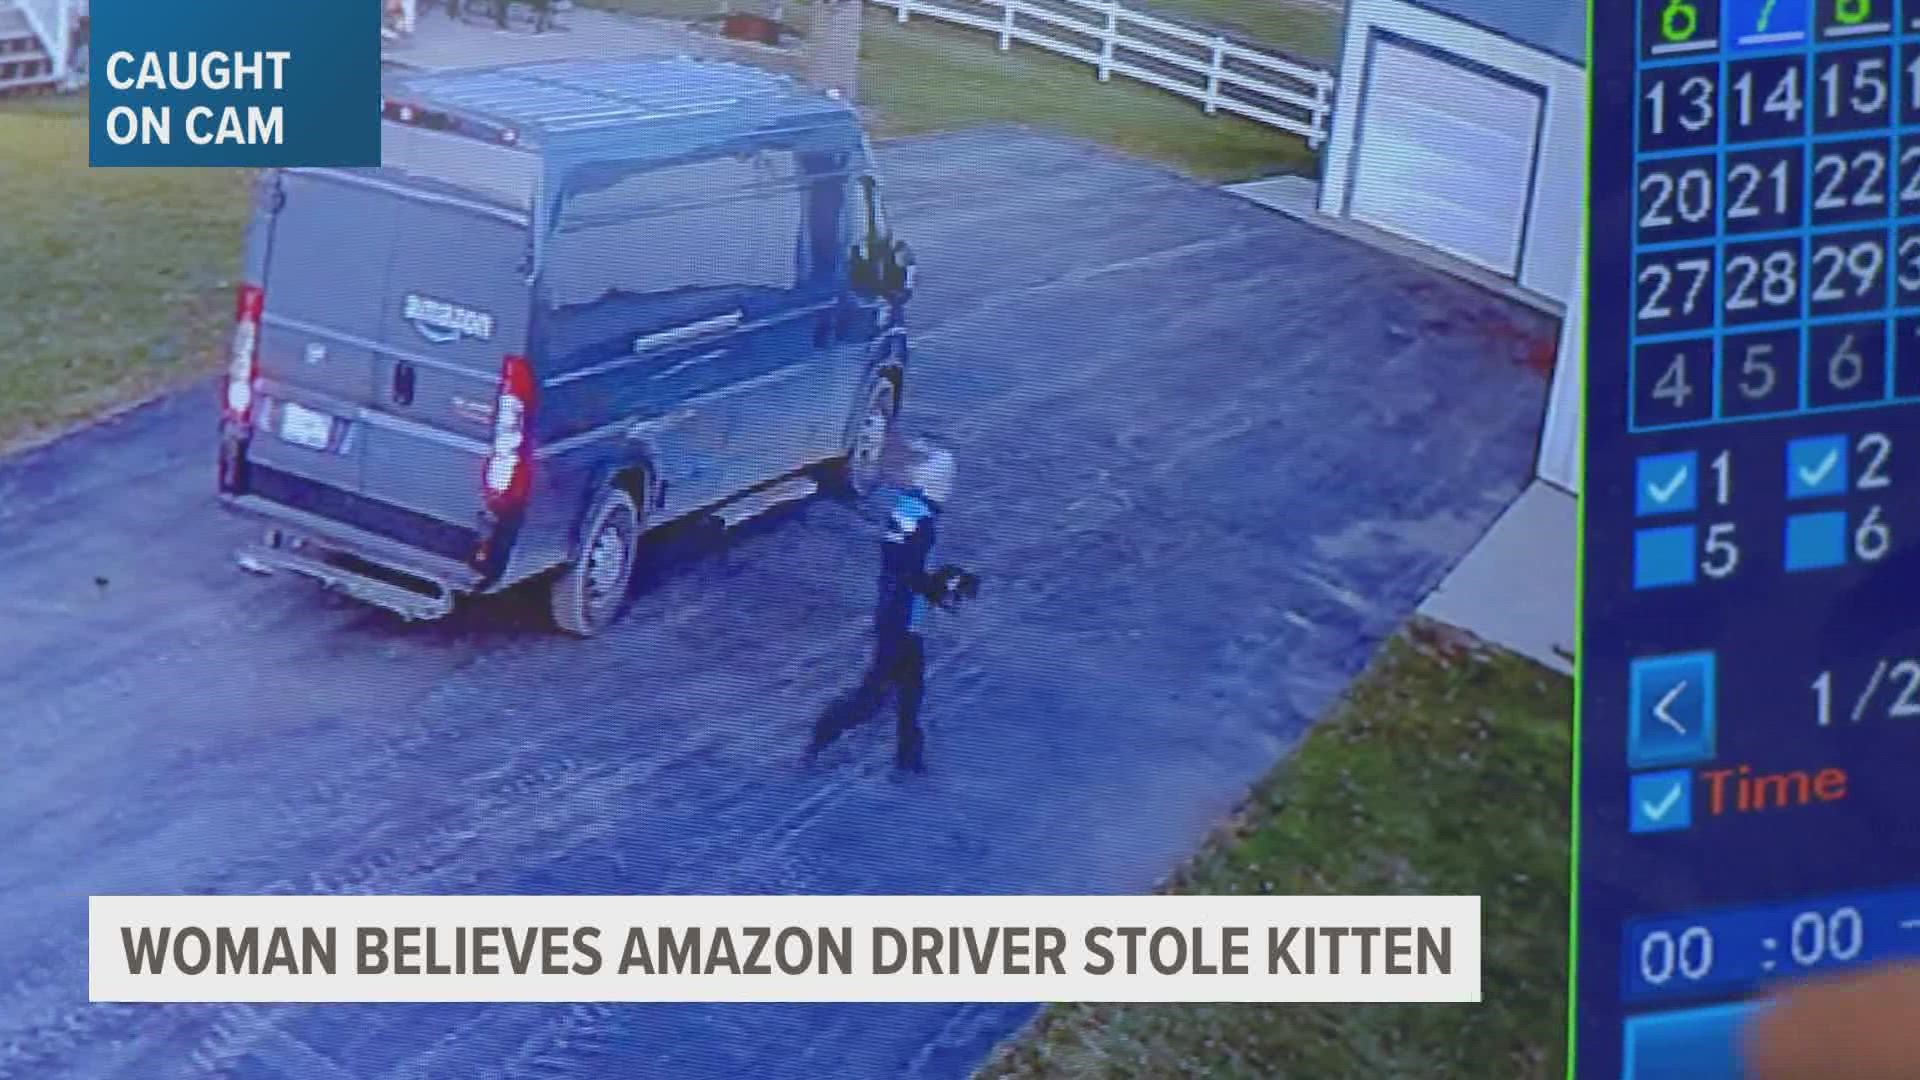 A West Michigan family is asking for help after they believe an Amazon driver took off with their kitten earlier this week.